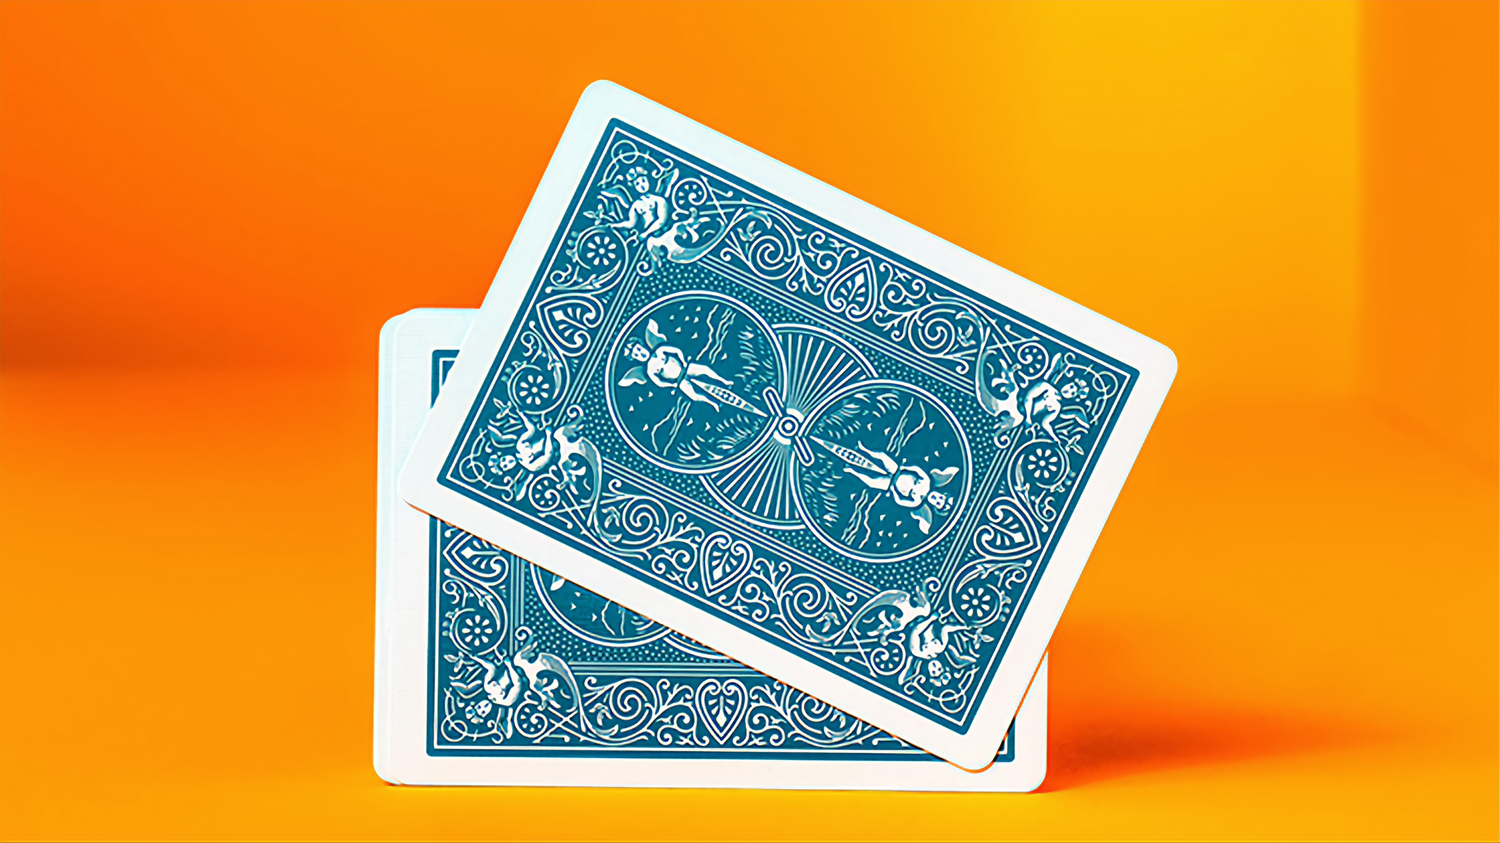 Bicycle Blue Legacy Master by Ellusionist : Playing Cards, Poker, Magic, Cardistry, Singapore